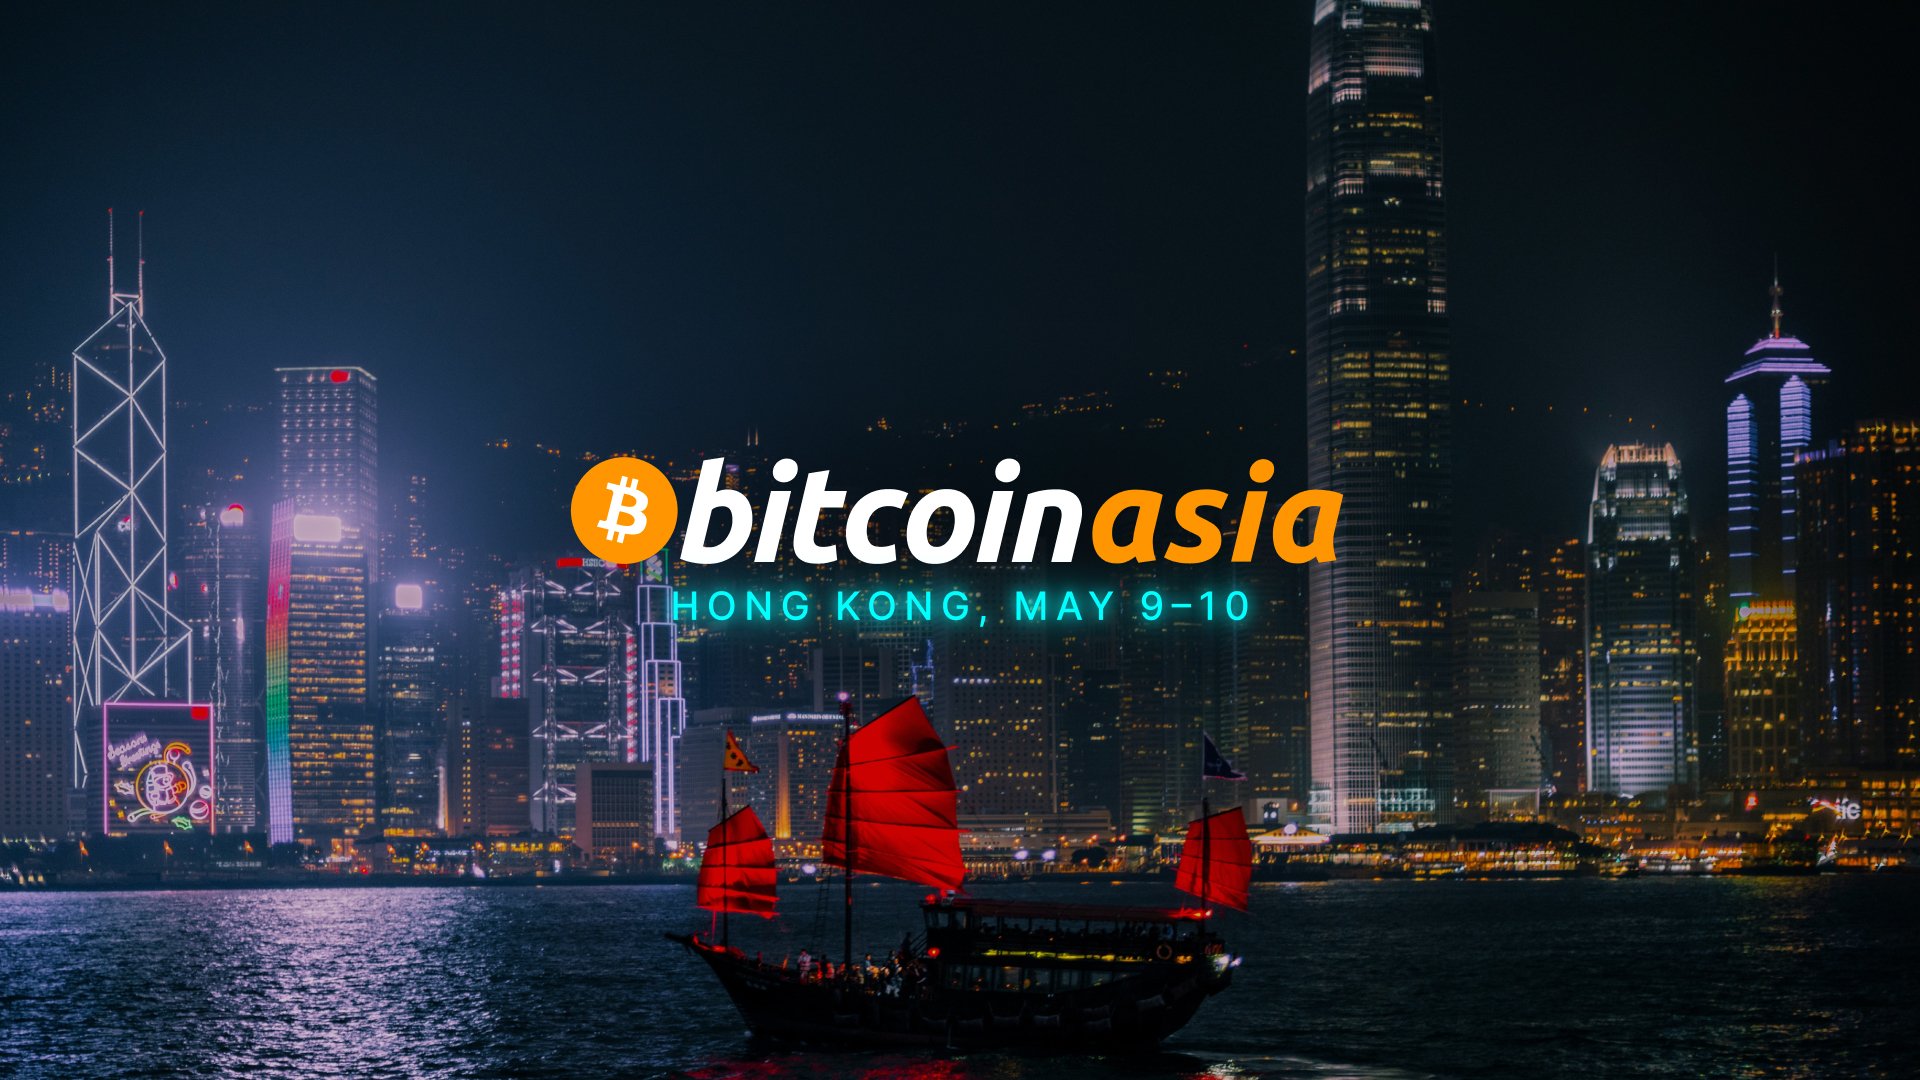 The World’s Best Bitcoin Experience is Coming to Hong Kong